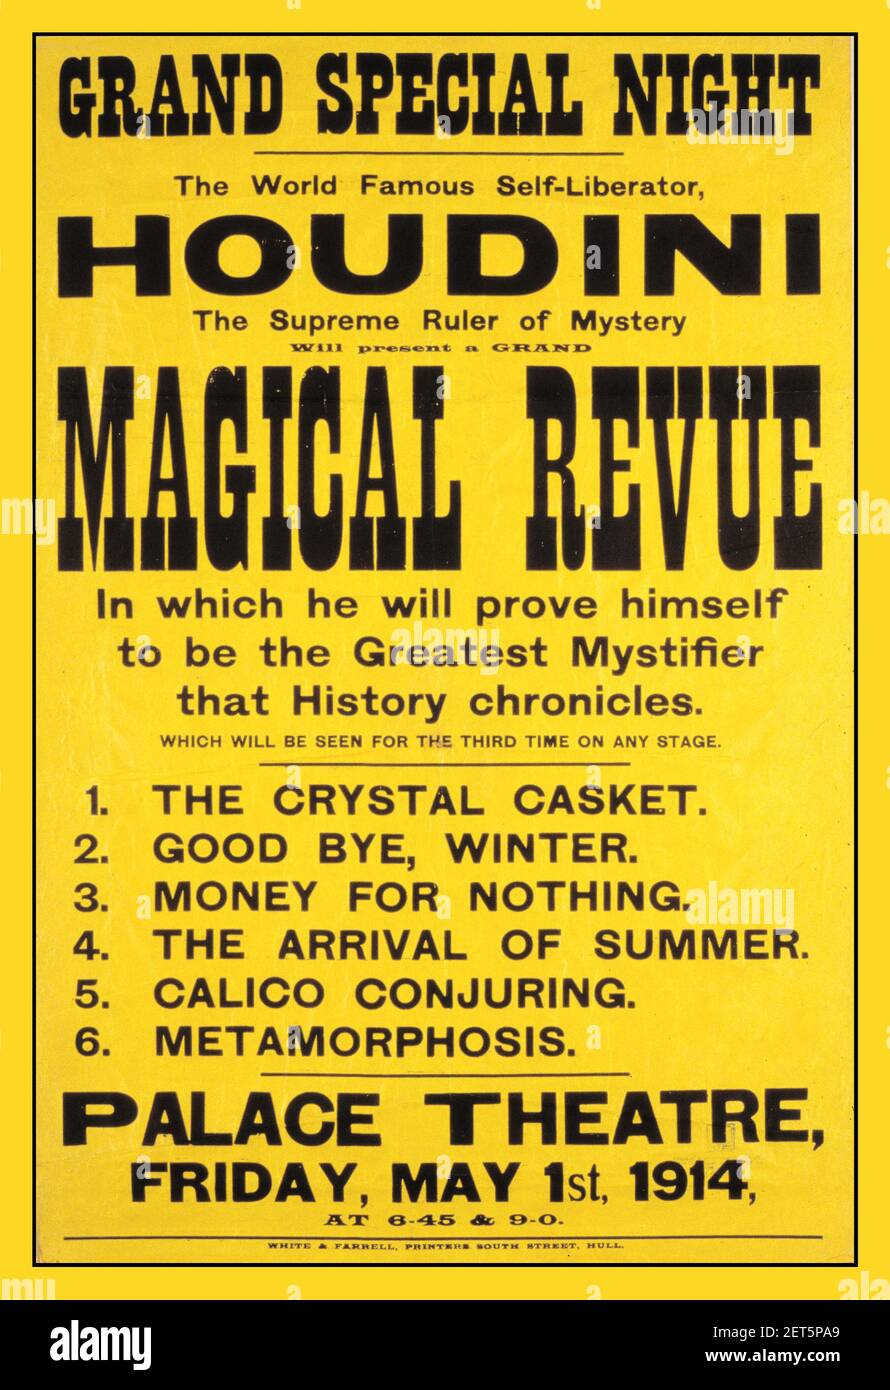 HOUDINI Vintage Theatre Poster grand special night, for escapologist HOUDINI, The greatest Mystifier,  a magical revue of, The Crystal casket, Good bye winter, money for nothing, the arrival of summer, calico conjuring, metamorphosis Palace Theatre May 1st 1914 Stock Photo